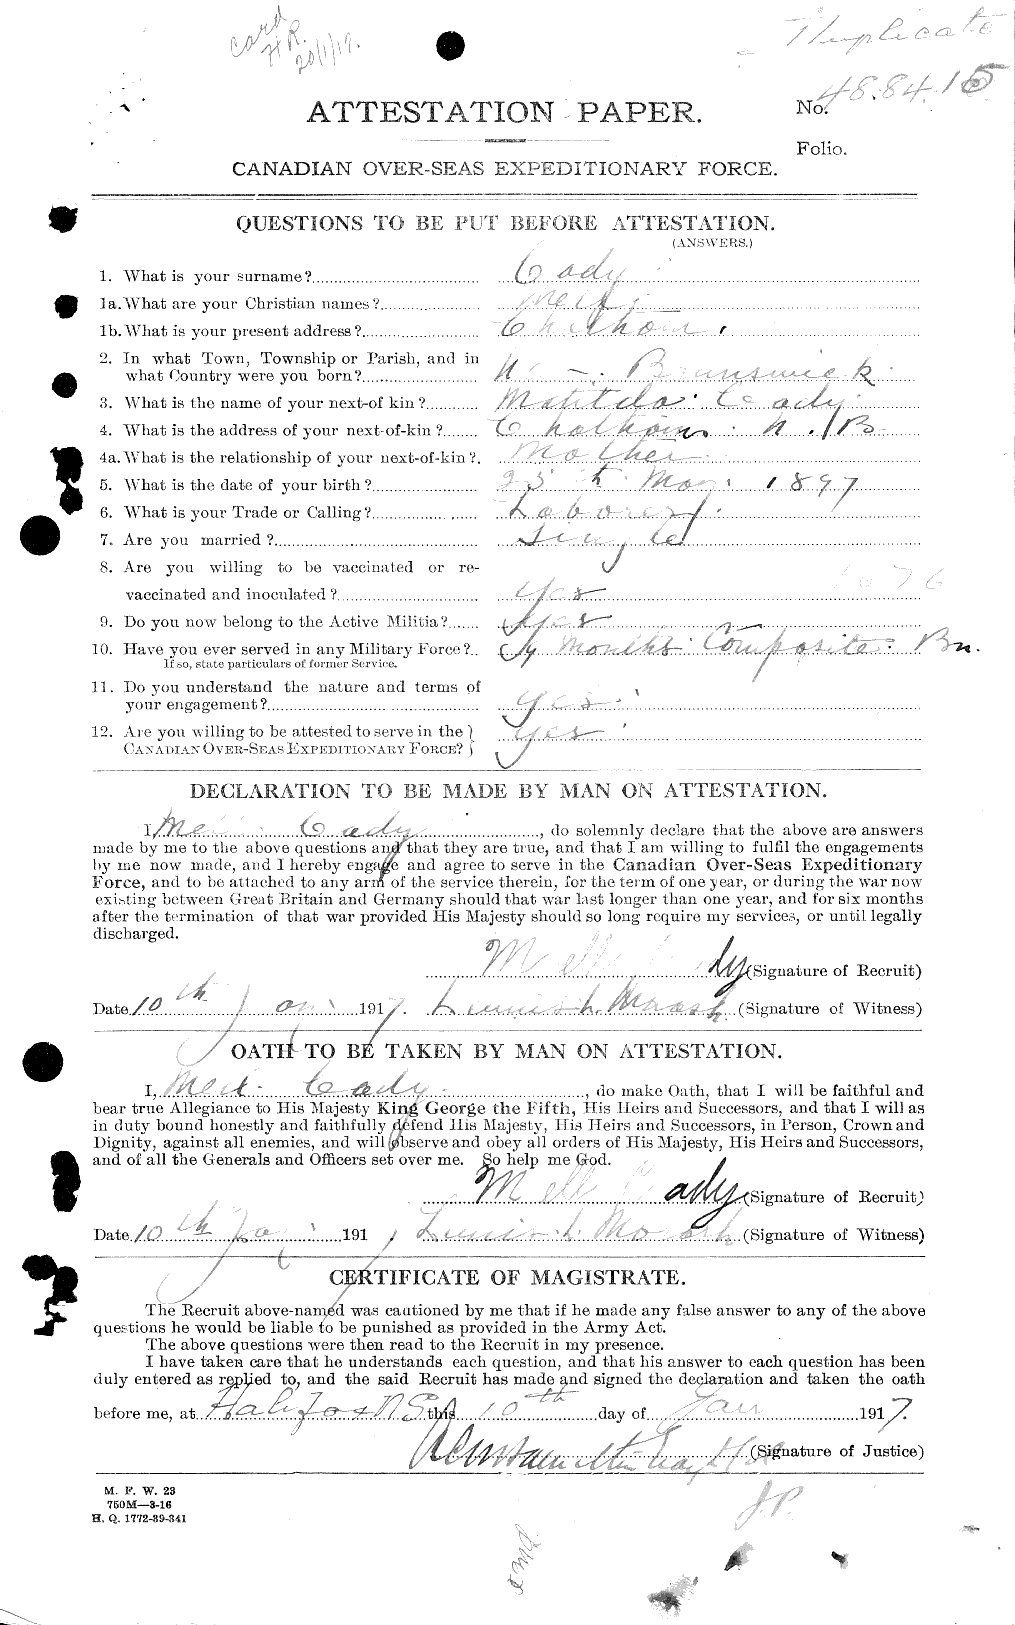 Personnel Records of the First World War - CEF 000178a